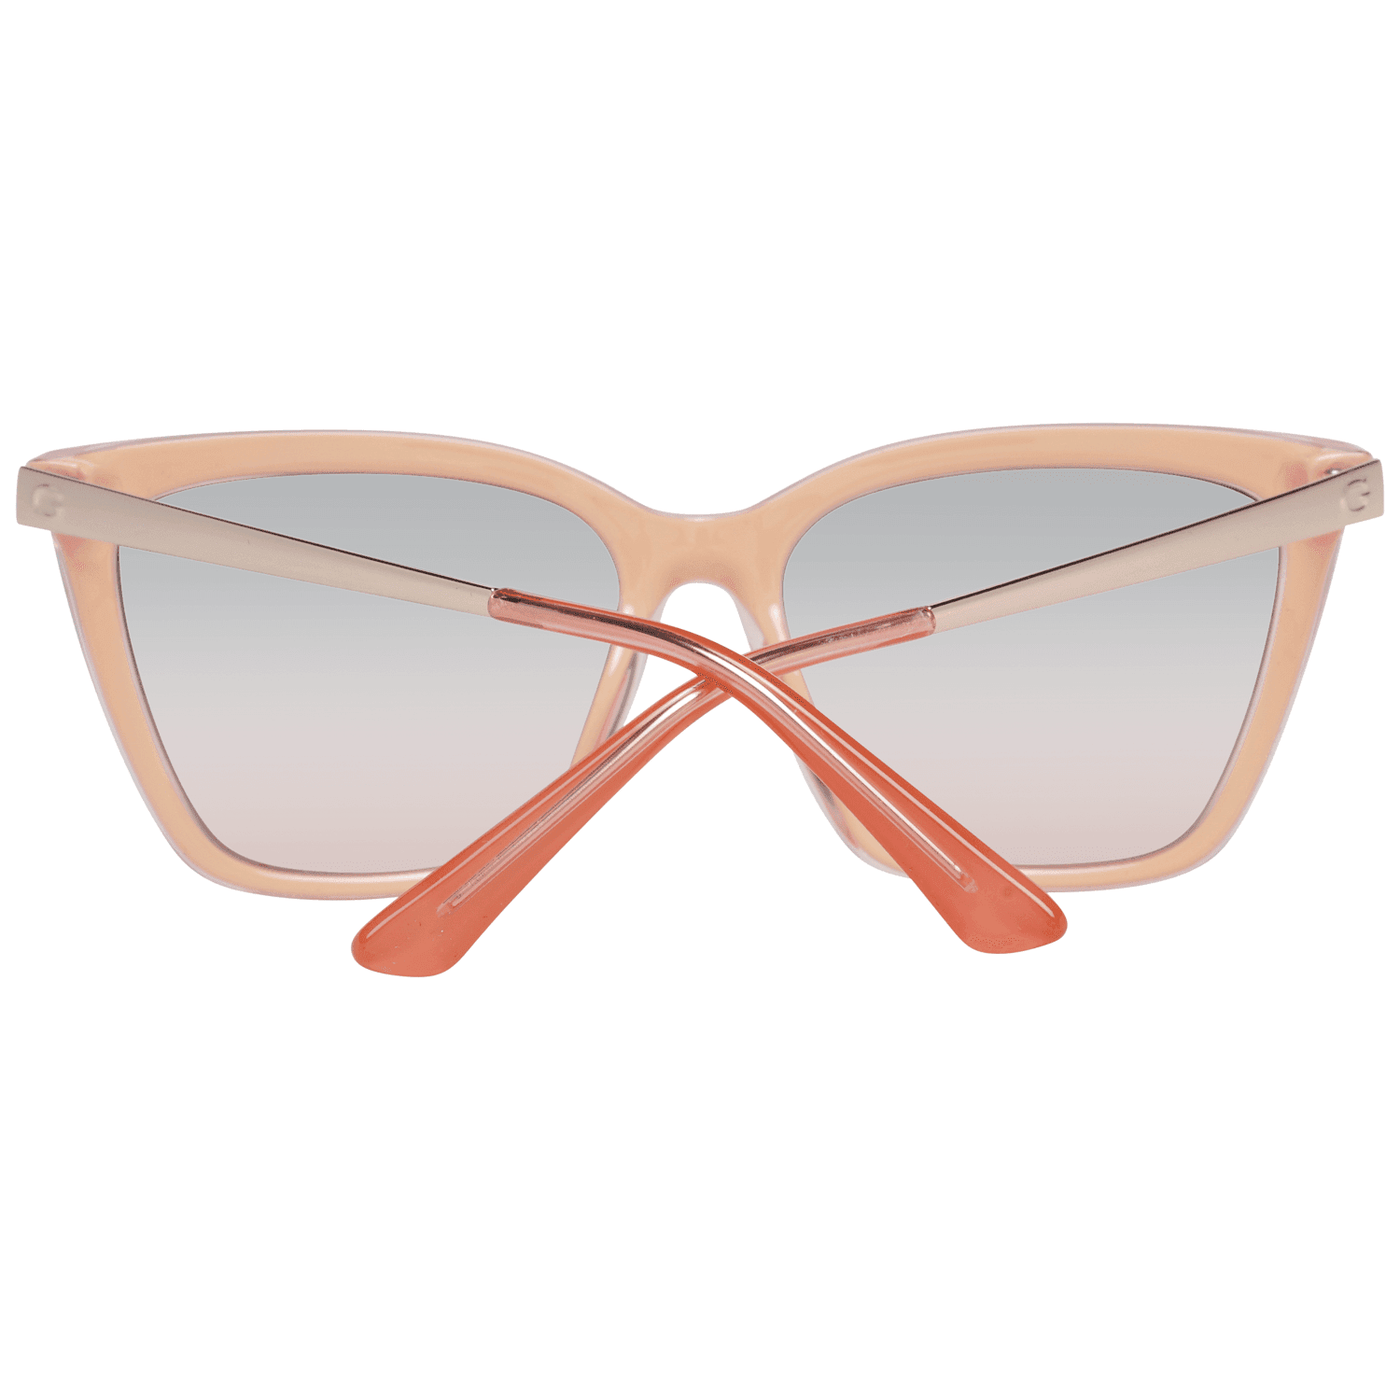 Guess Gradient cat eye Sunglasses #women, Coral, feed-agegroup-adult, feed-color-coral, feed-gender-female, Guess, Sunglasses for Women - Sunglasses at SEYMAYKA